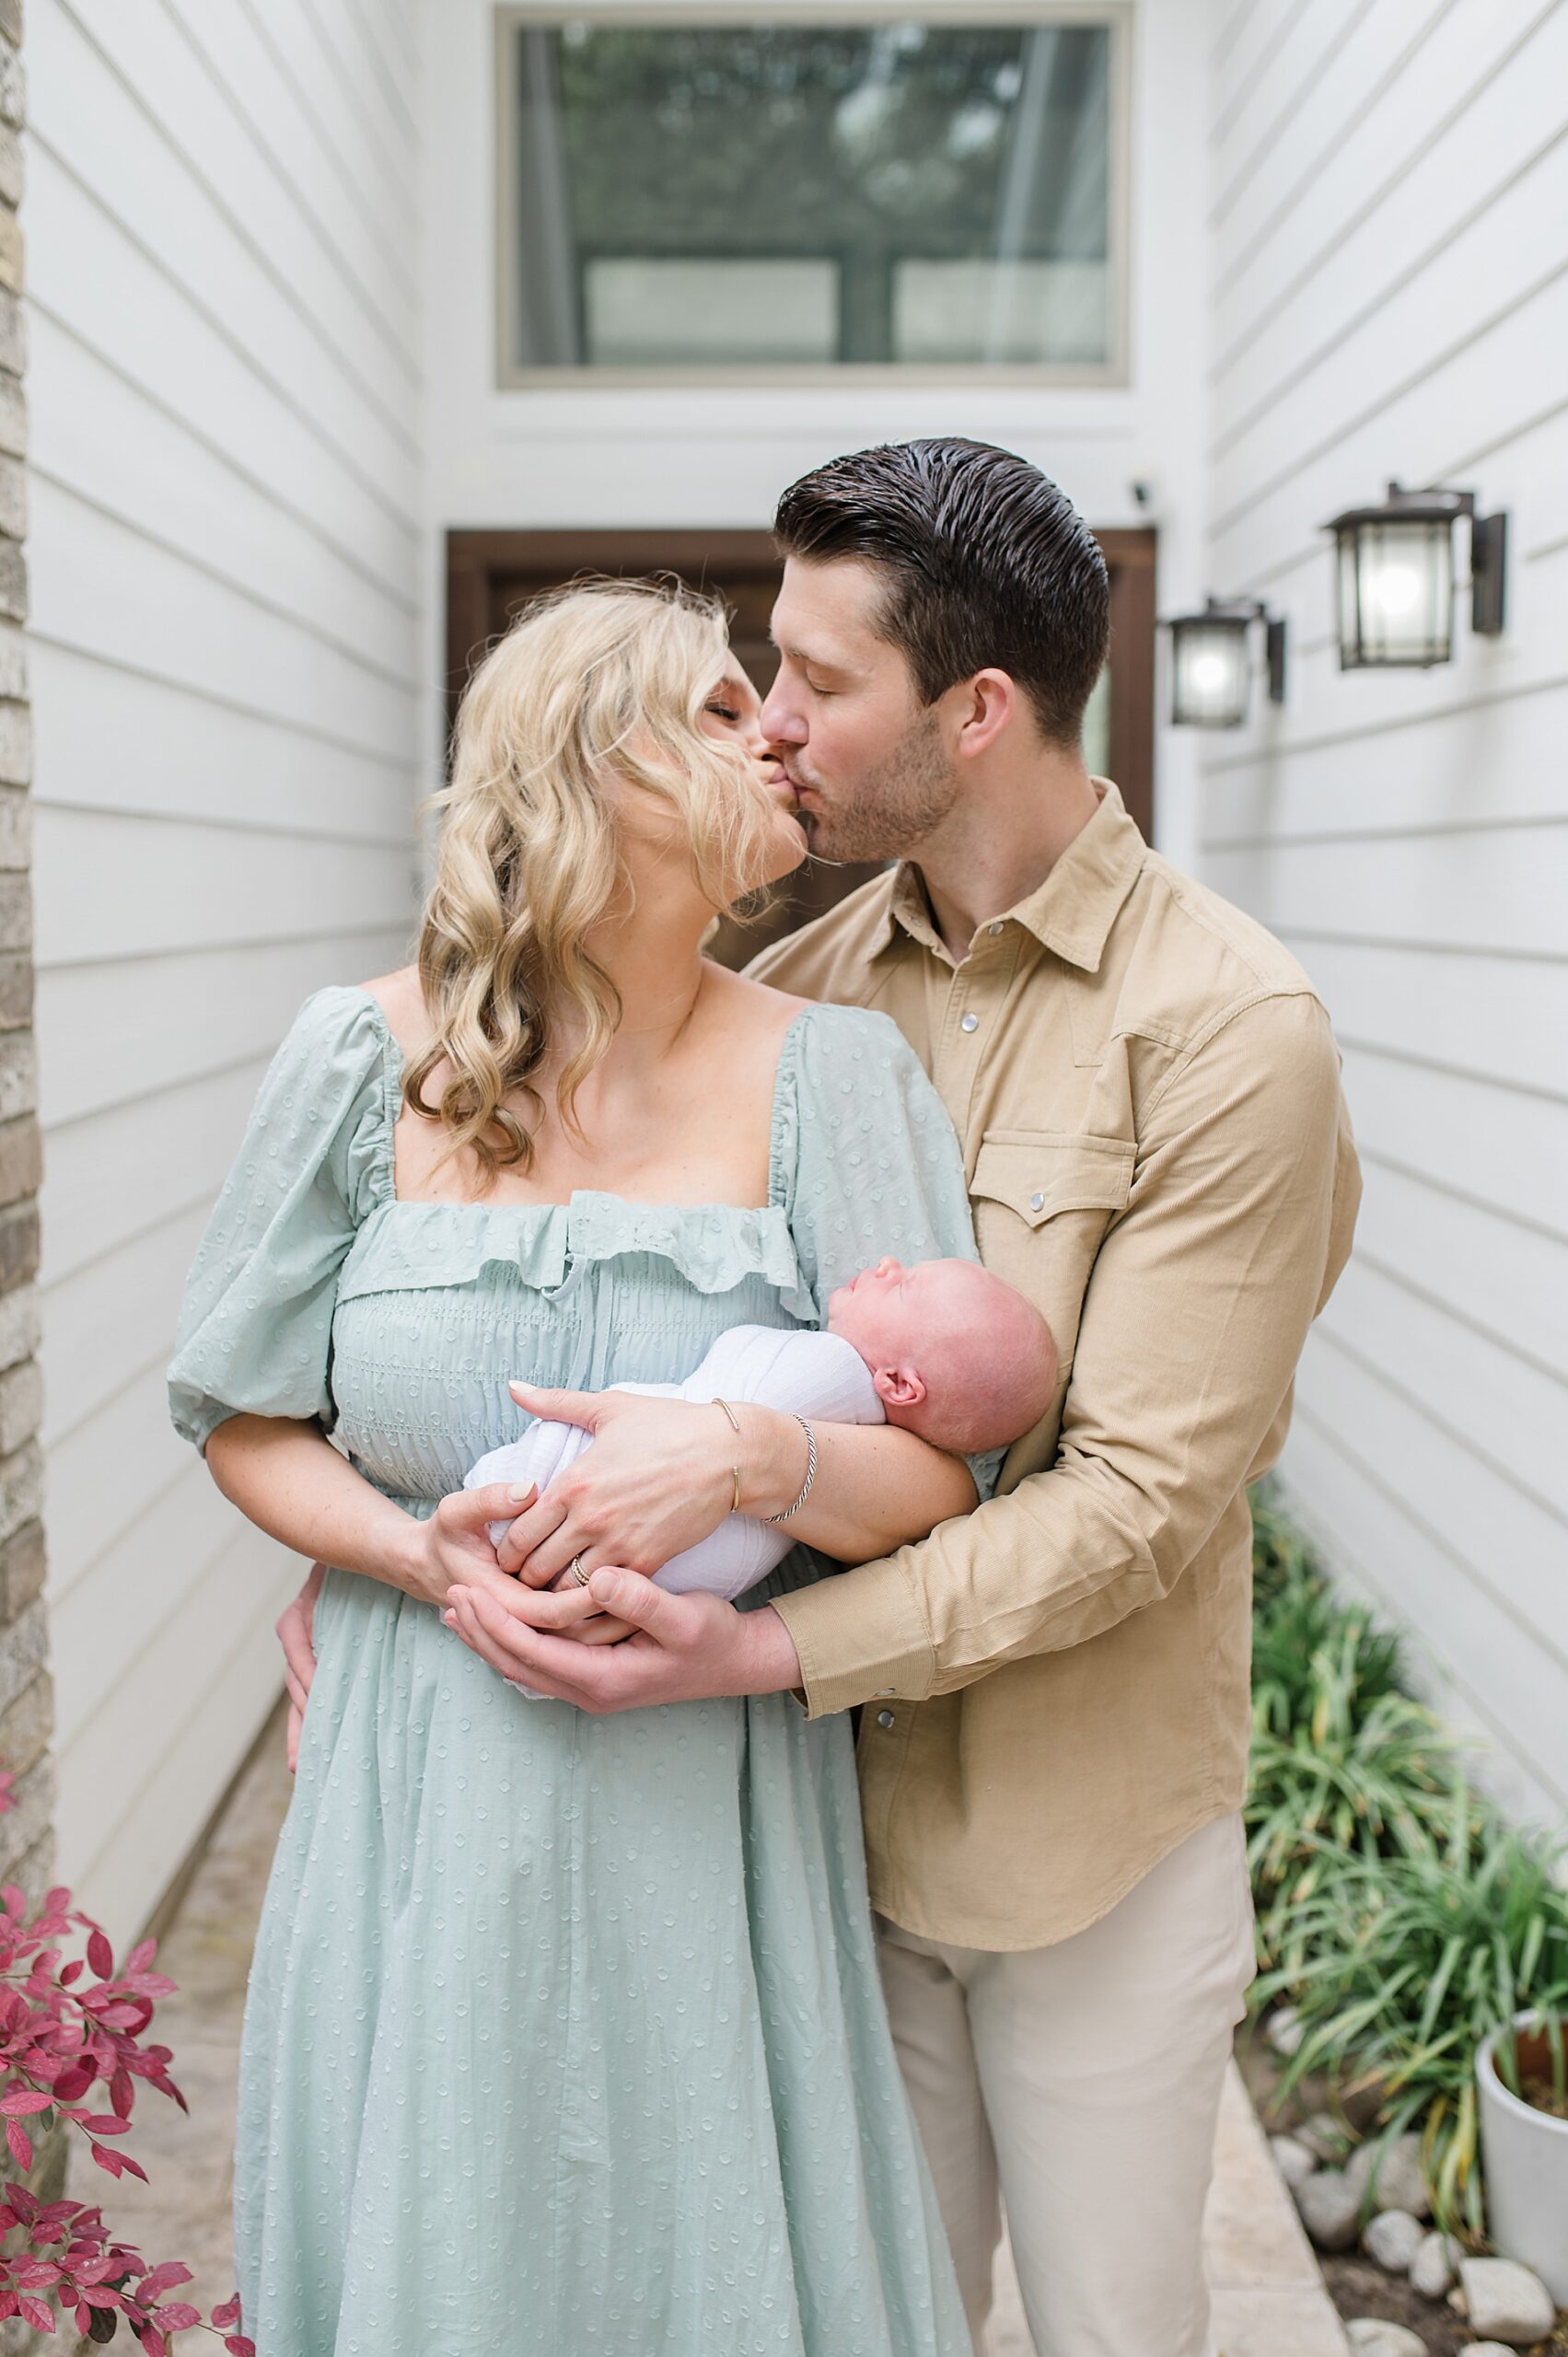 new family of three outside Texas home during Cozy In-Home Newborn Session photographed by Lindsey Dutton Photography, a Dallas Newborn photographer
